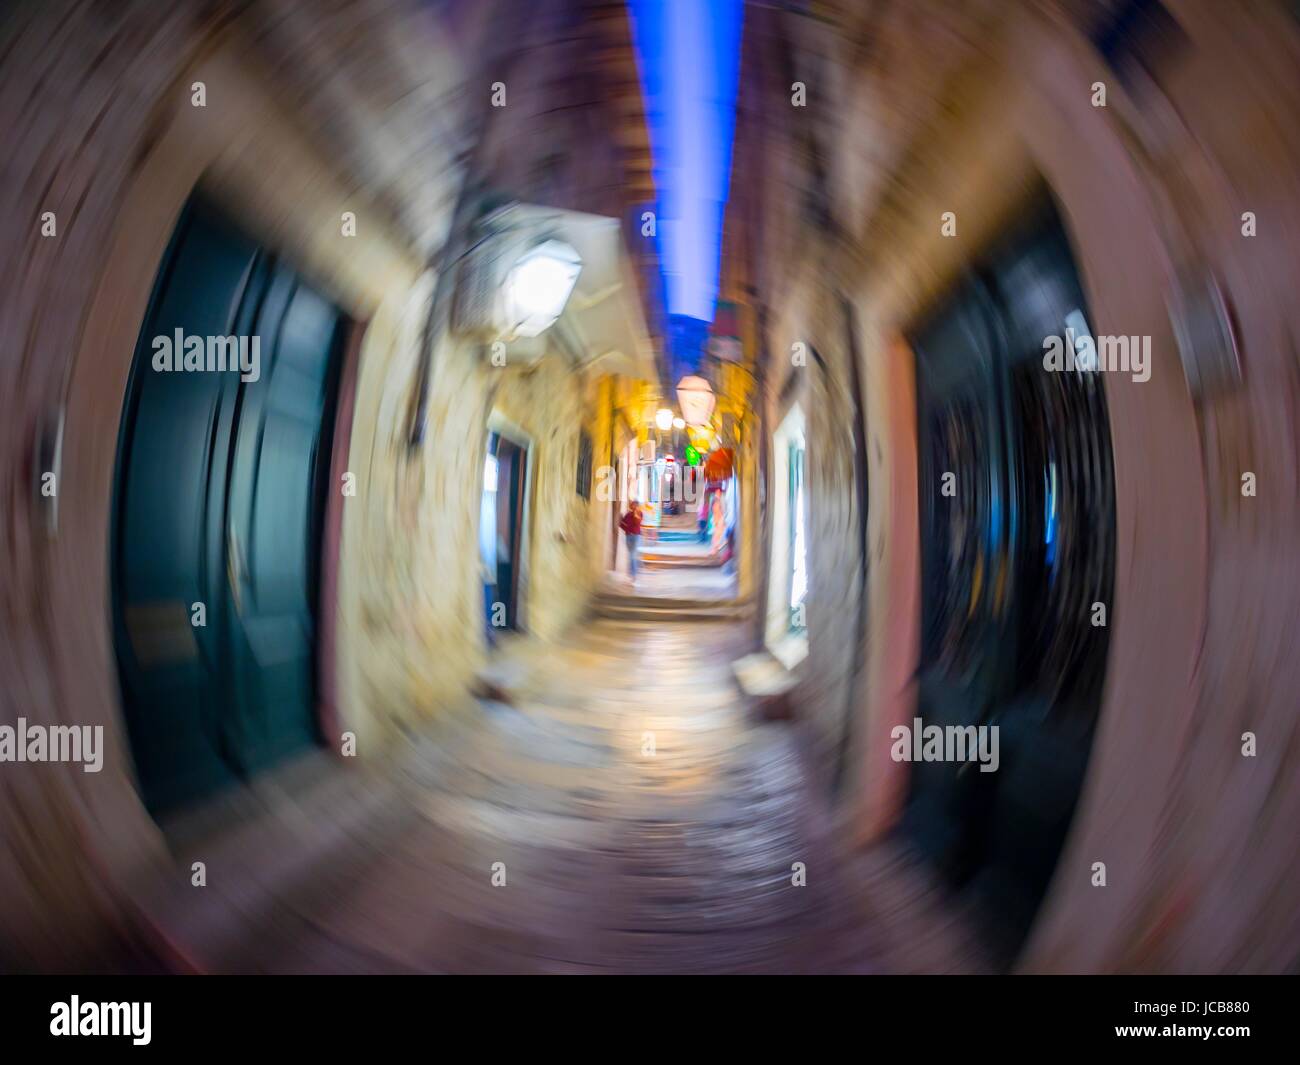 Dubrovnik old town in evening night tight street frenzy circular motion image Stock Photo